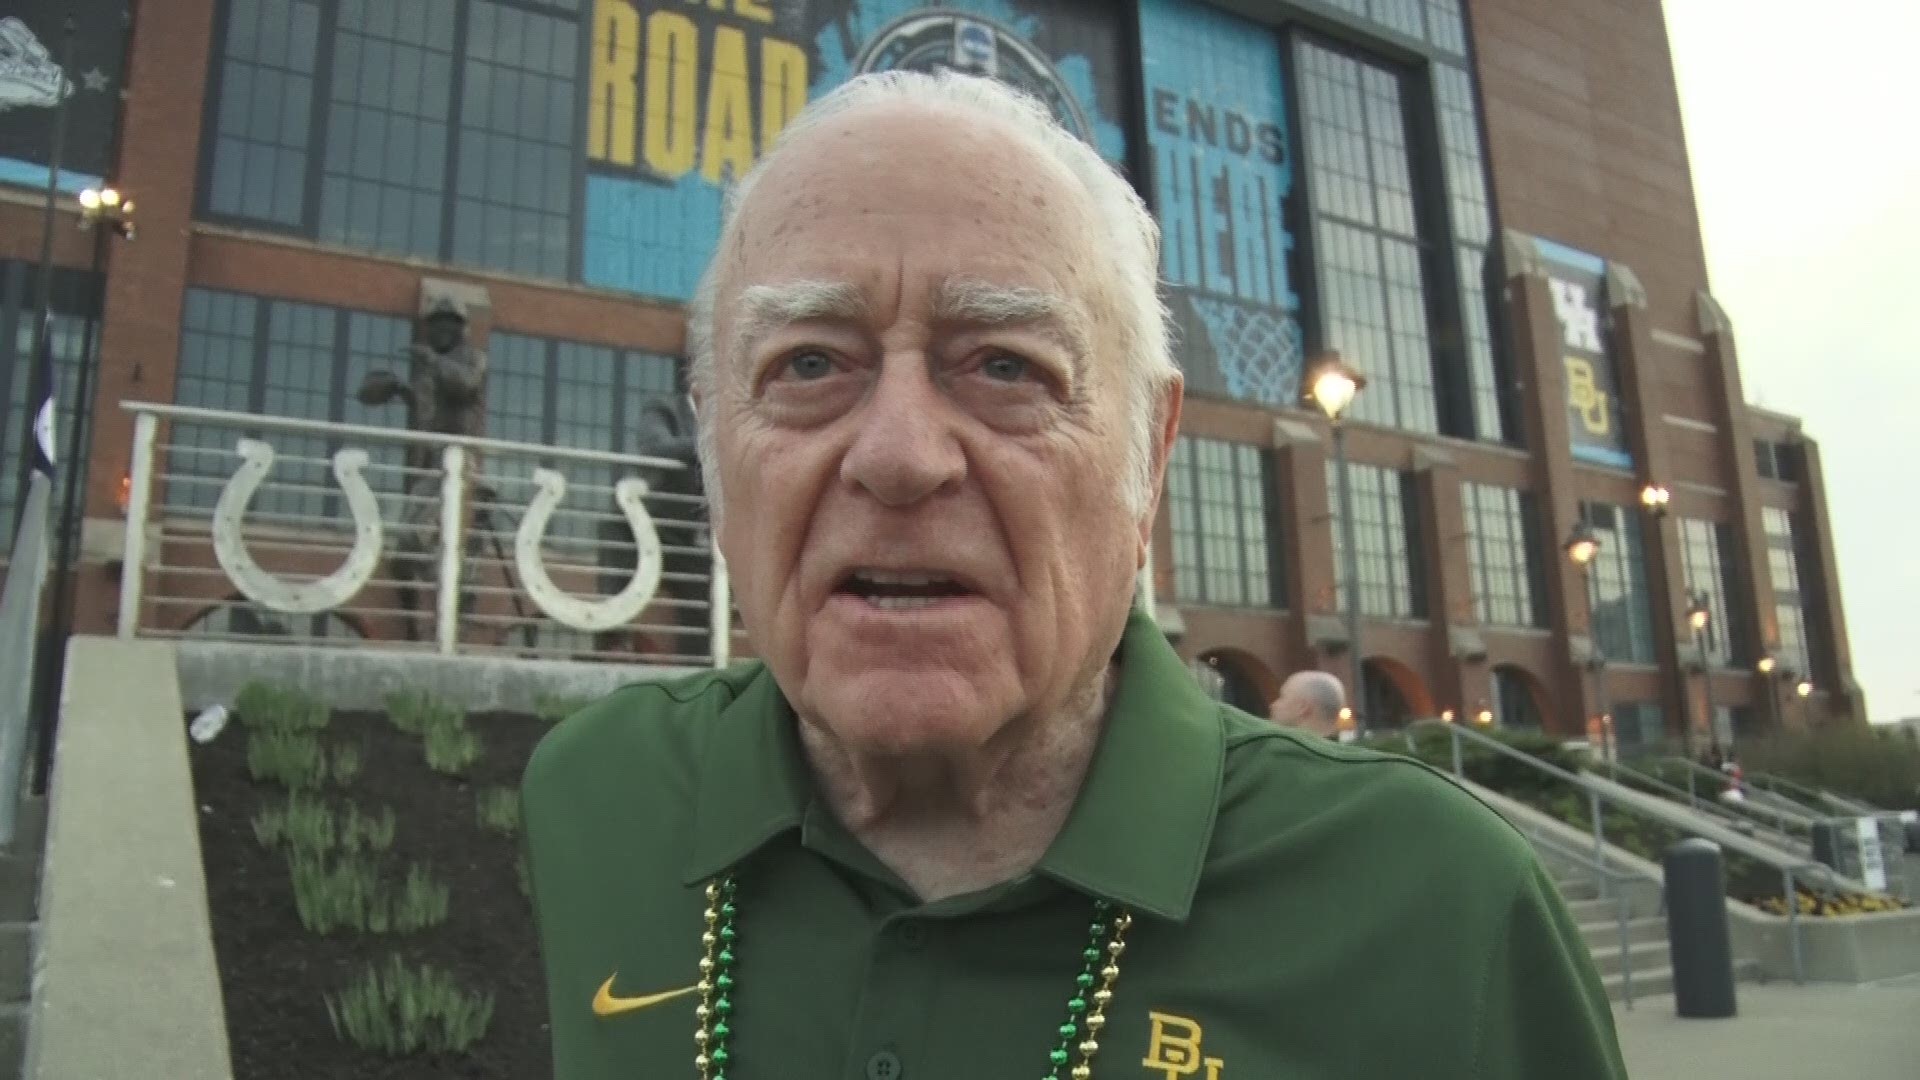 Sparky Beckham was a student when Baylor lost the national championship in 1948. 73 years later, he was there again as the Bears took home the title.